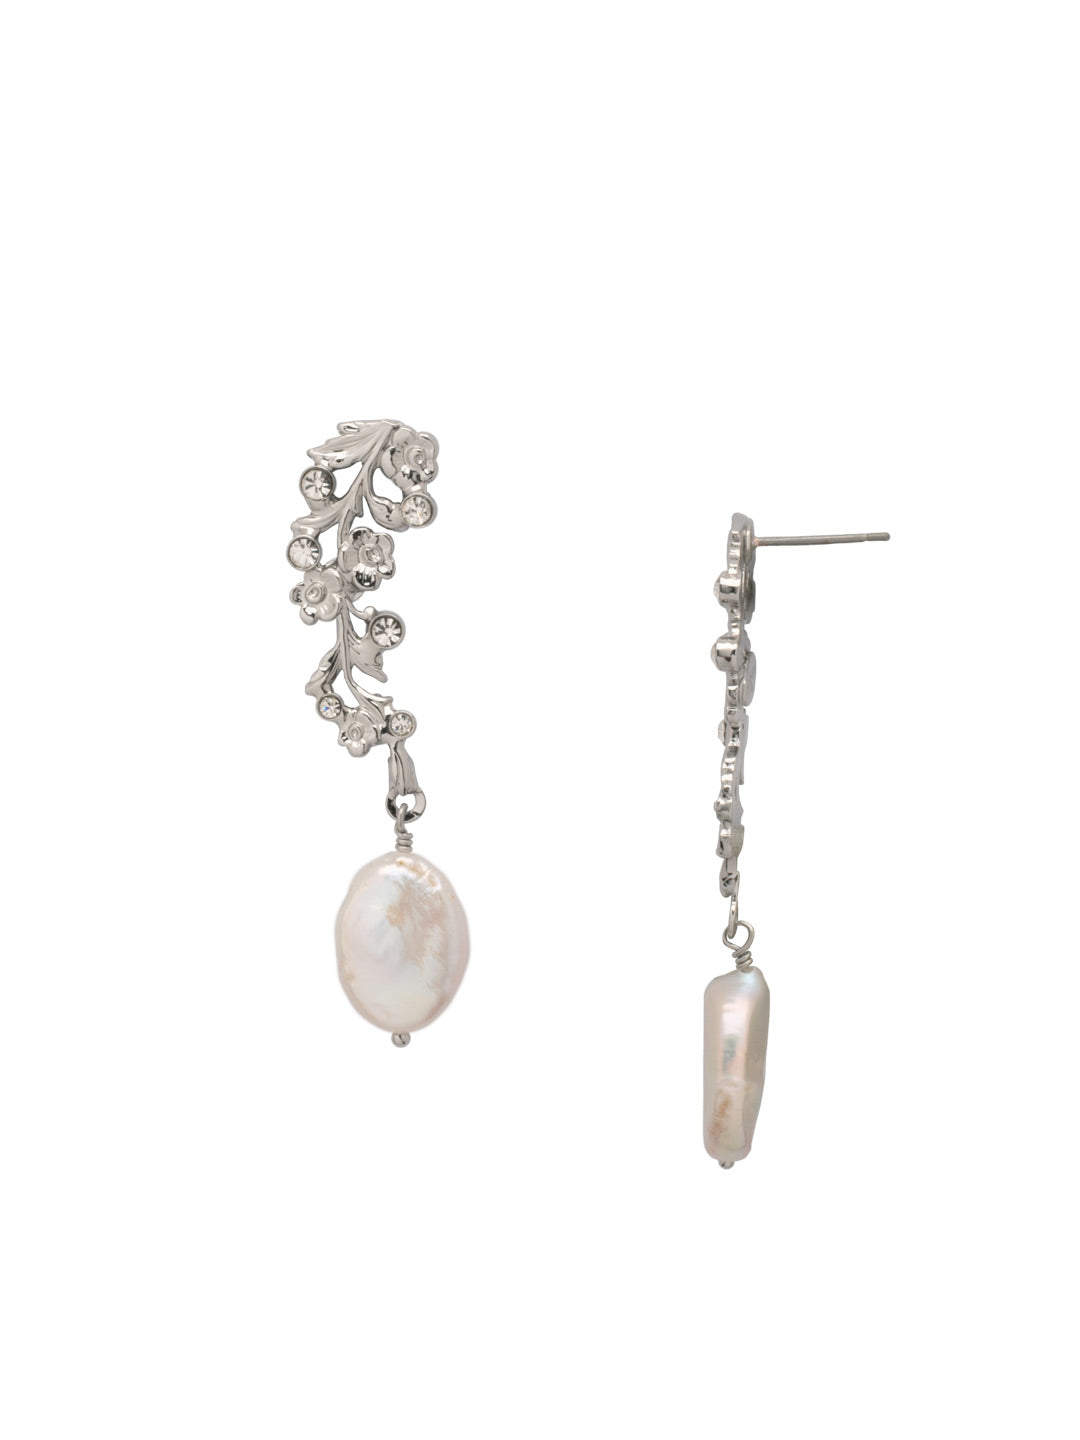 Indigo Dangle Earrings - EFH5PDMDP - <p>The Indigo Dangle Earrings feature delicate metal branches and flowers, with a single freshwater coin pearl dangling on the end. From Sorrelli's Modern Pearl collection in our Palladium finish.</p>